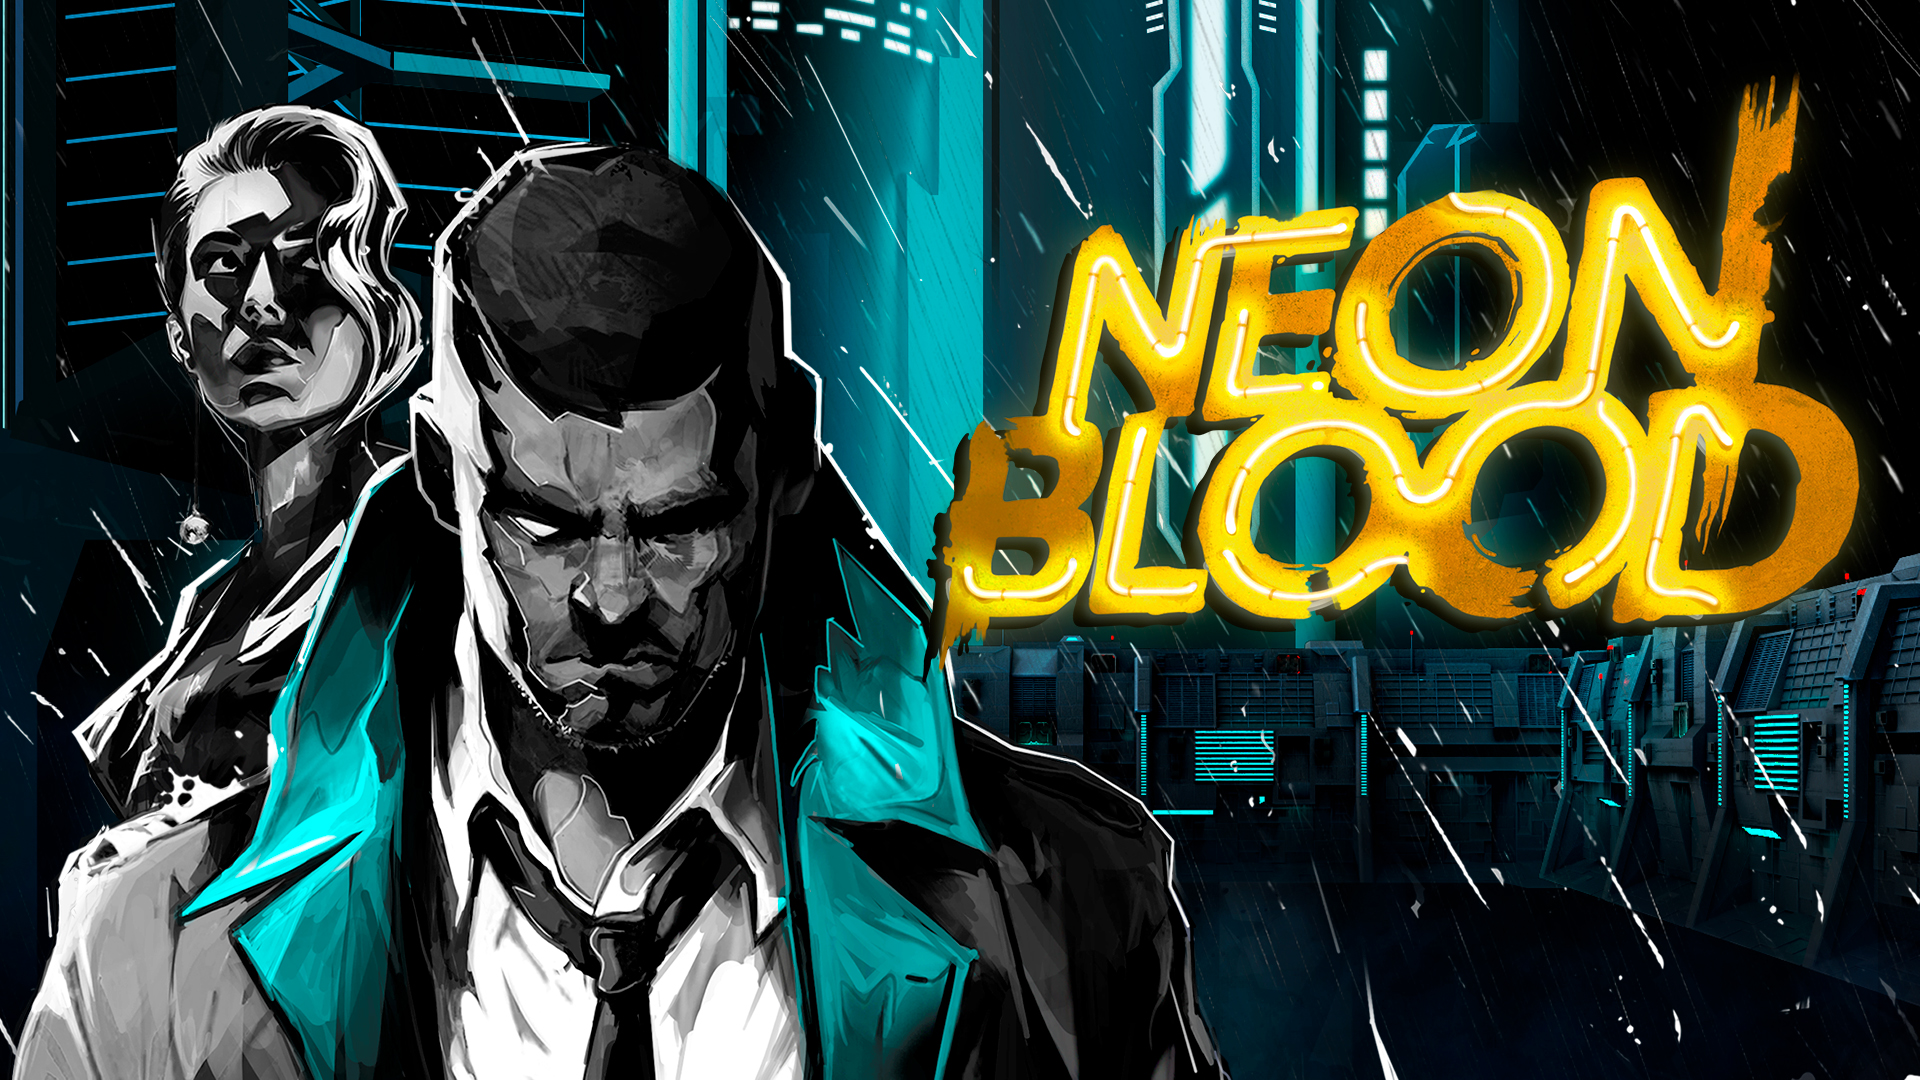 The key art for Neon Blood.